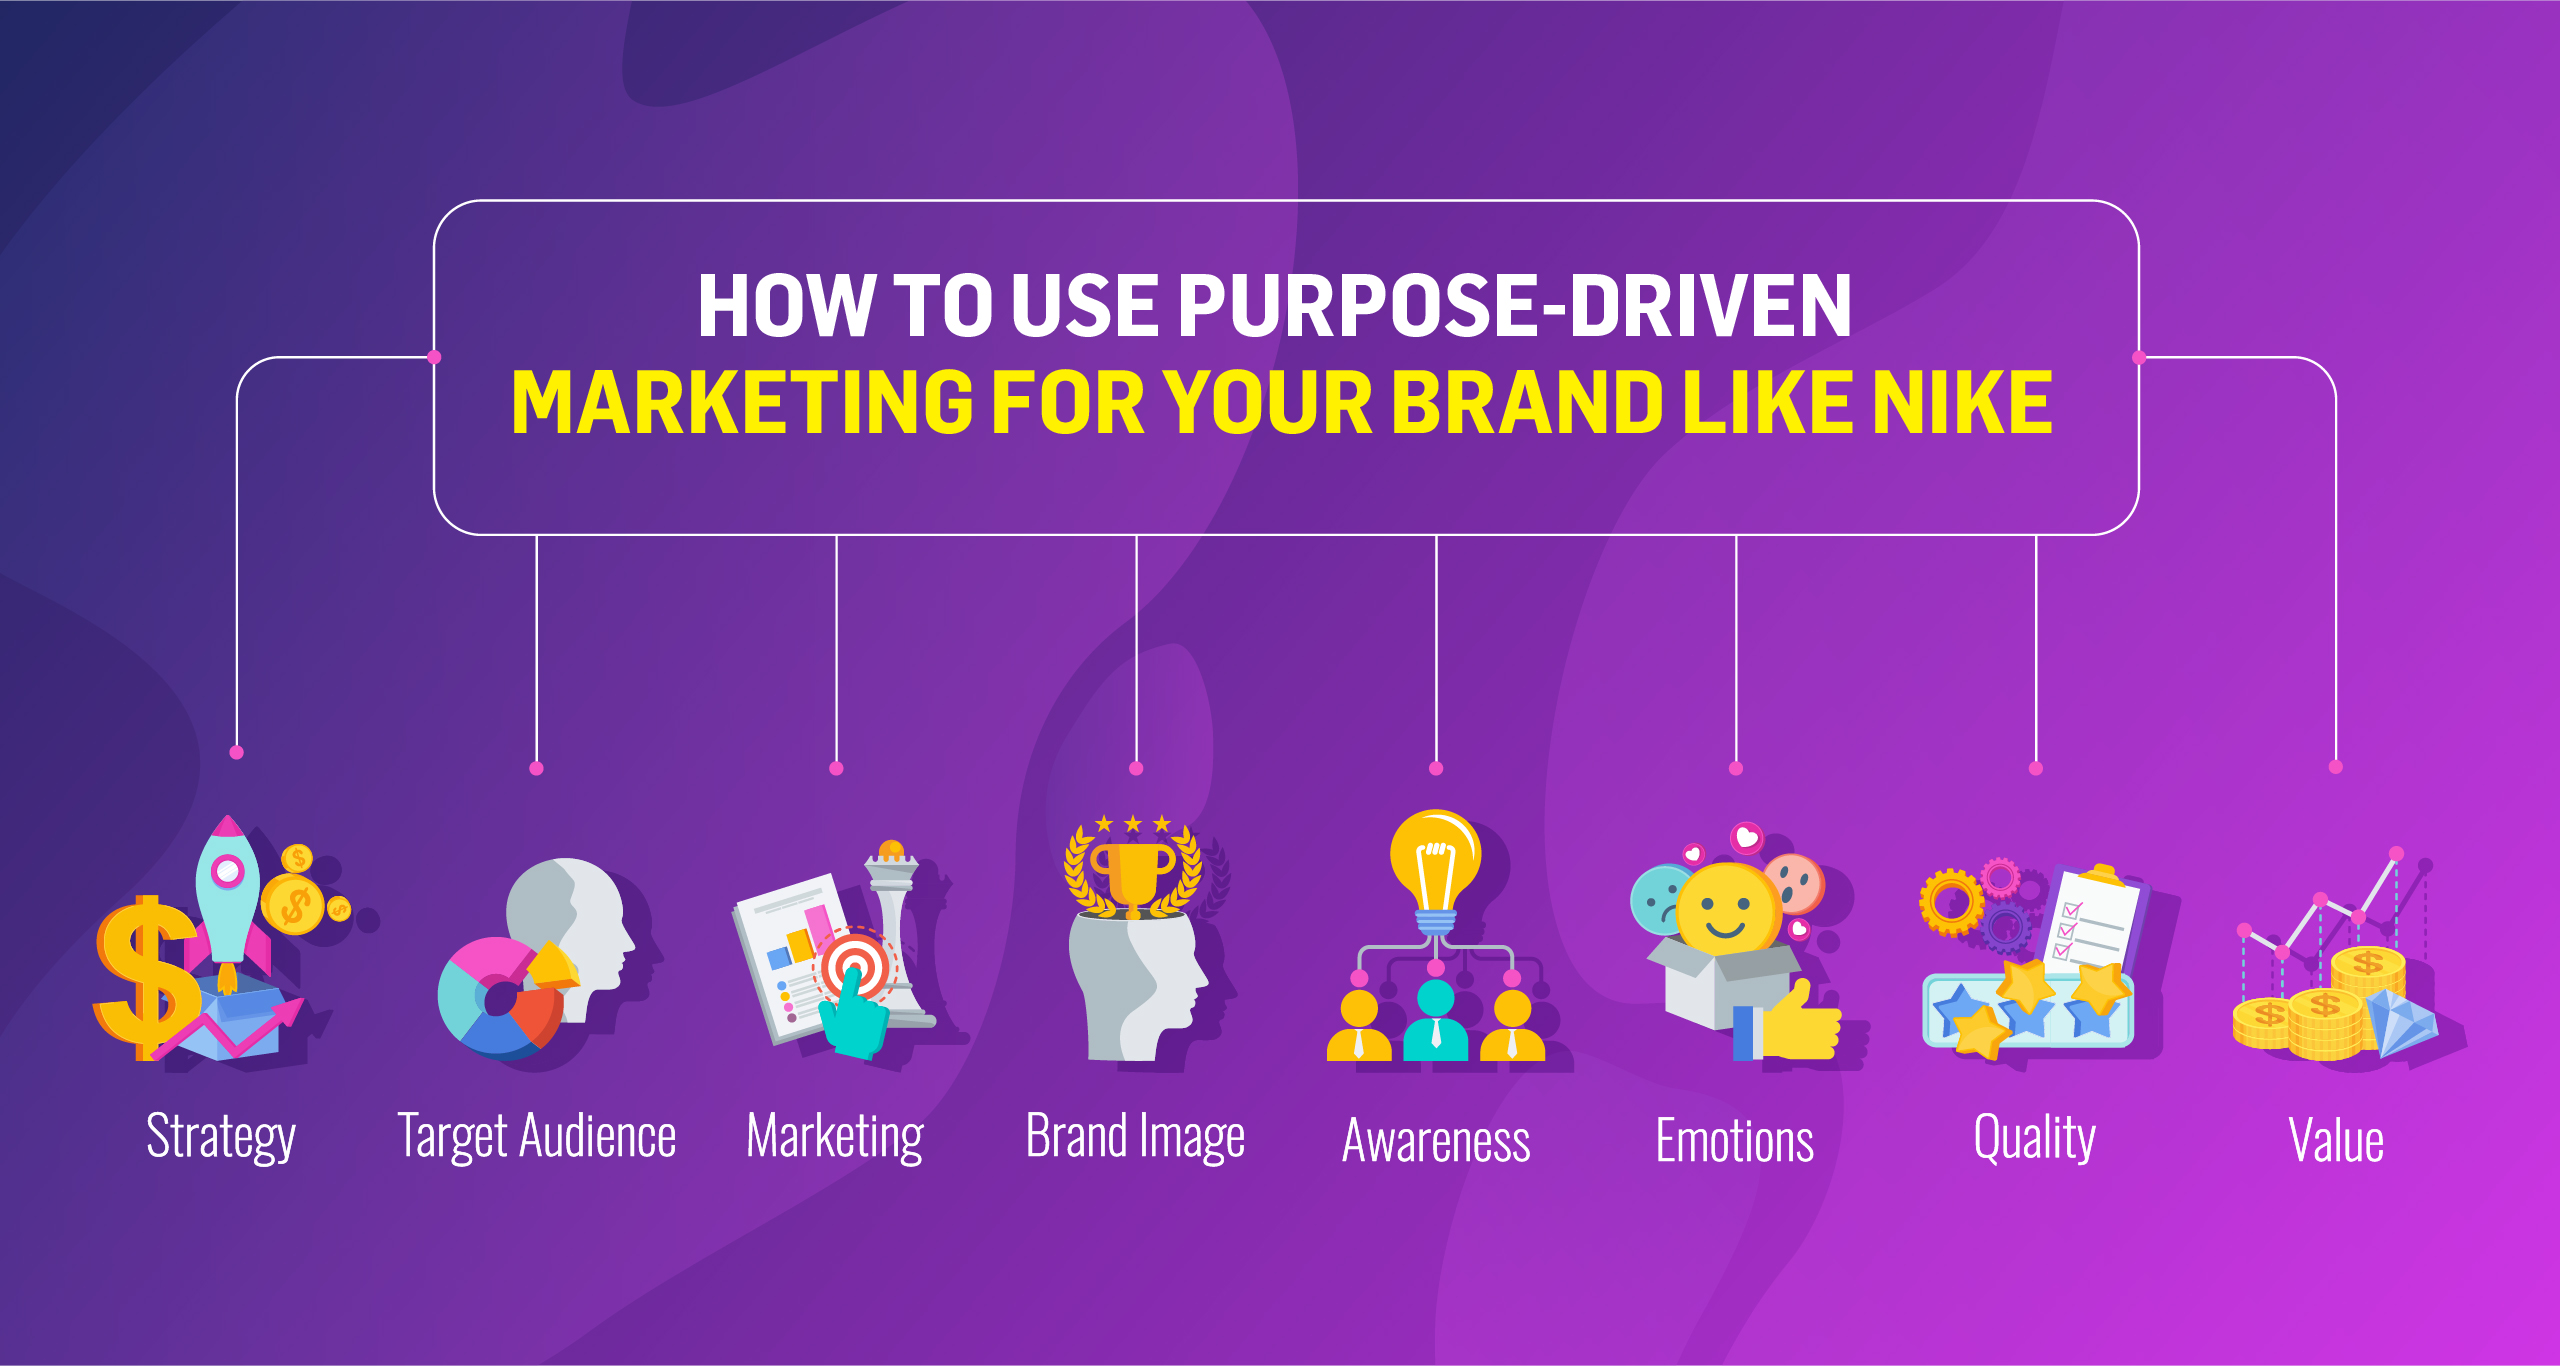 How to Use Purpose-Driven Marketing for Your Brand like Nike